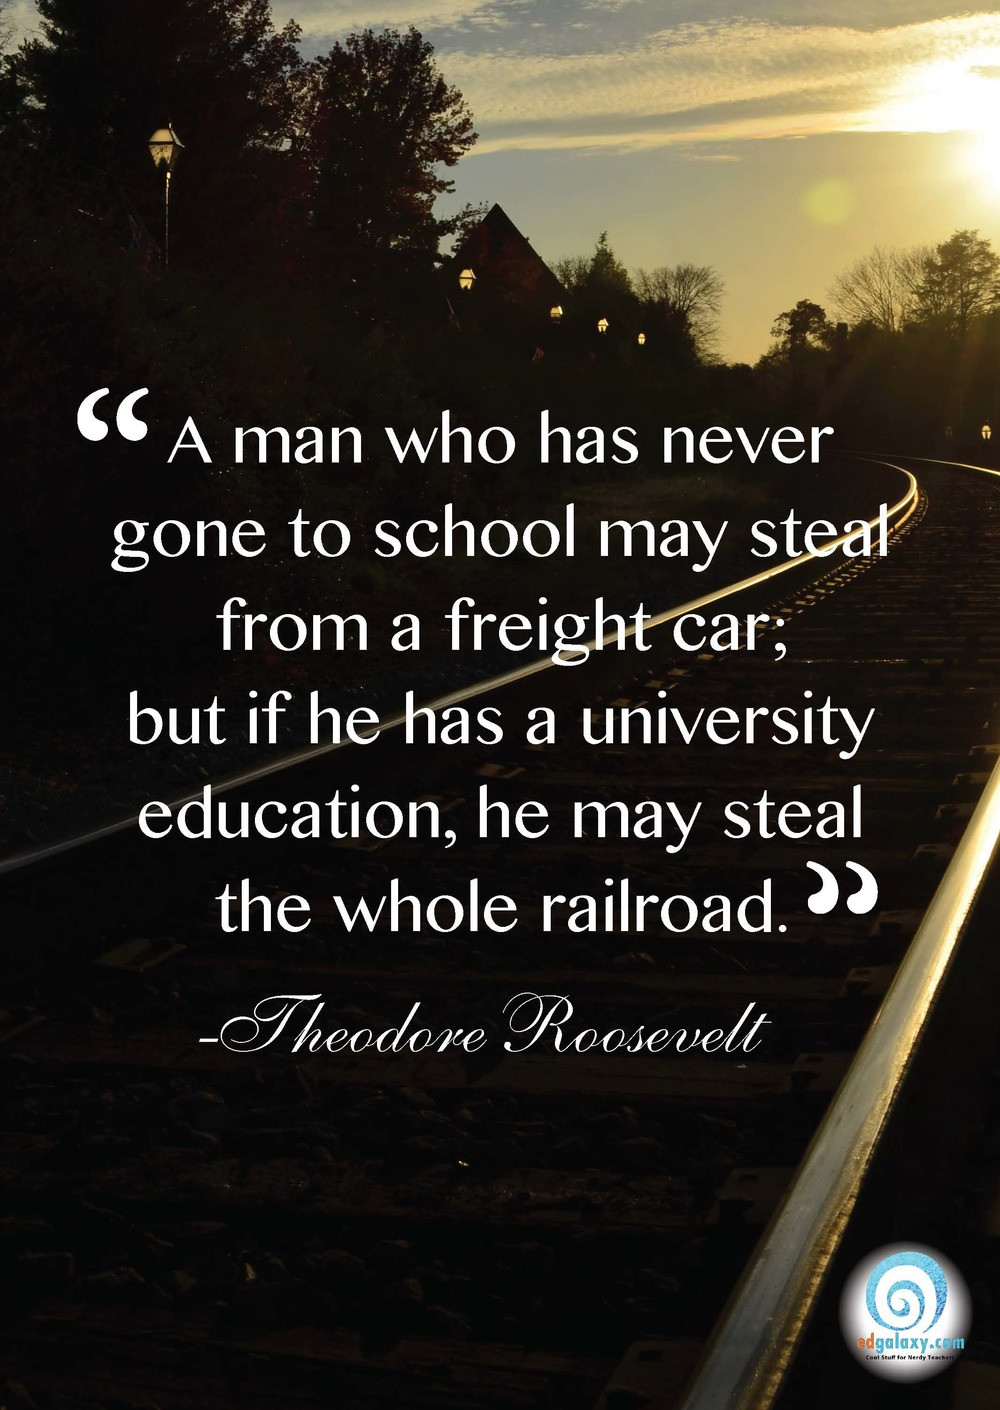 Inspirational Quote About Education
 Education Quotes Famous Quotes for teachers and Students